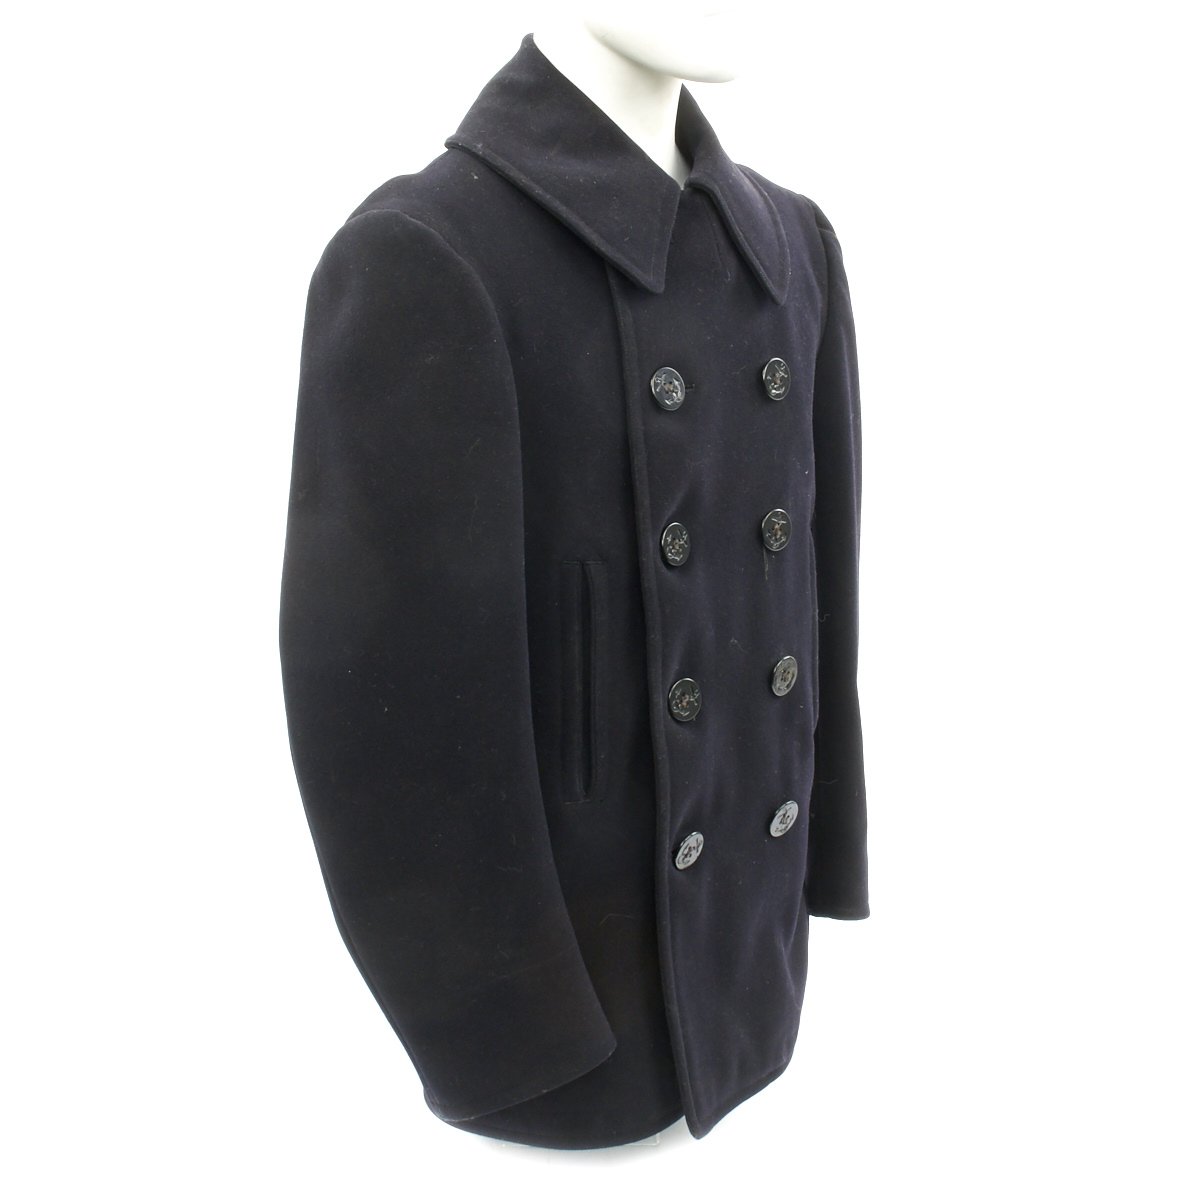 Original WWII U.S. Navy 10 Button Wool Pea Coat by Naval Clothing 